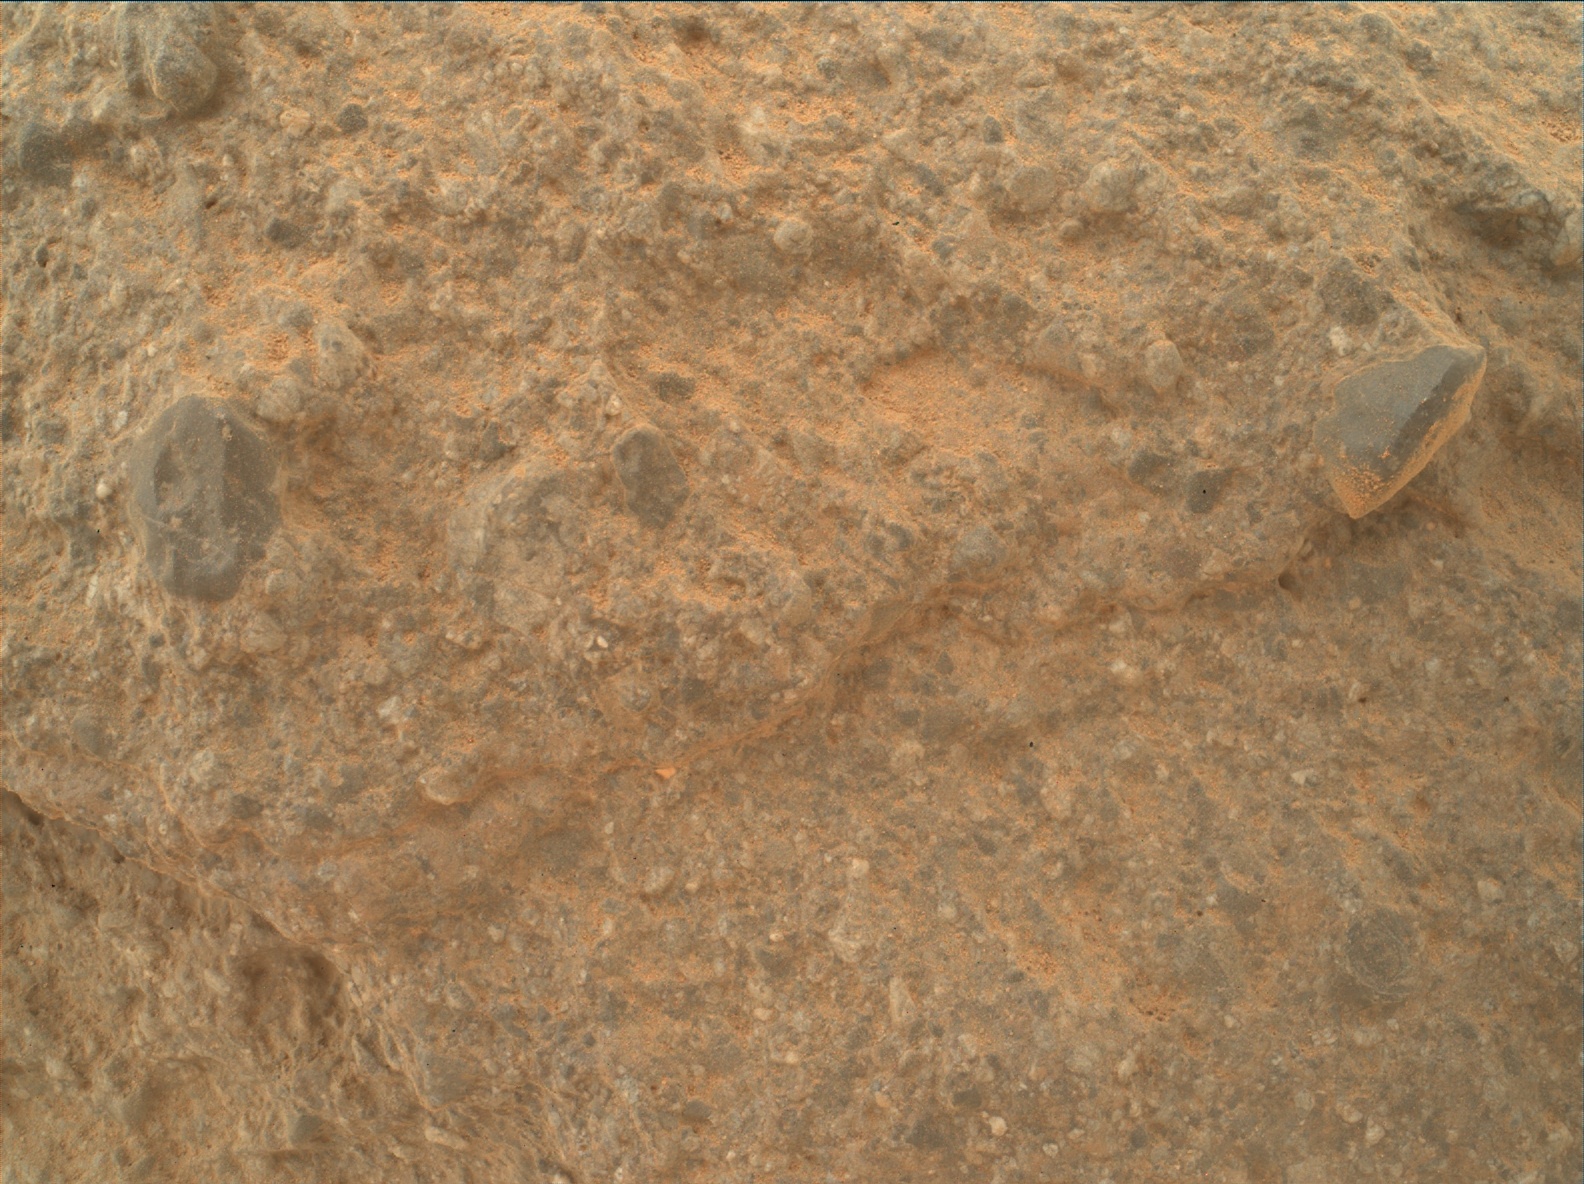 Nasa's Mars rover Curiosity acquired this image using its Mars Hand Lens Imager (MAHLI) on Sol 396